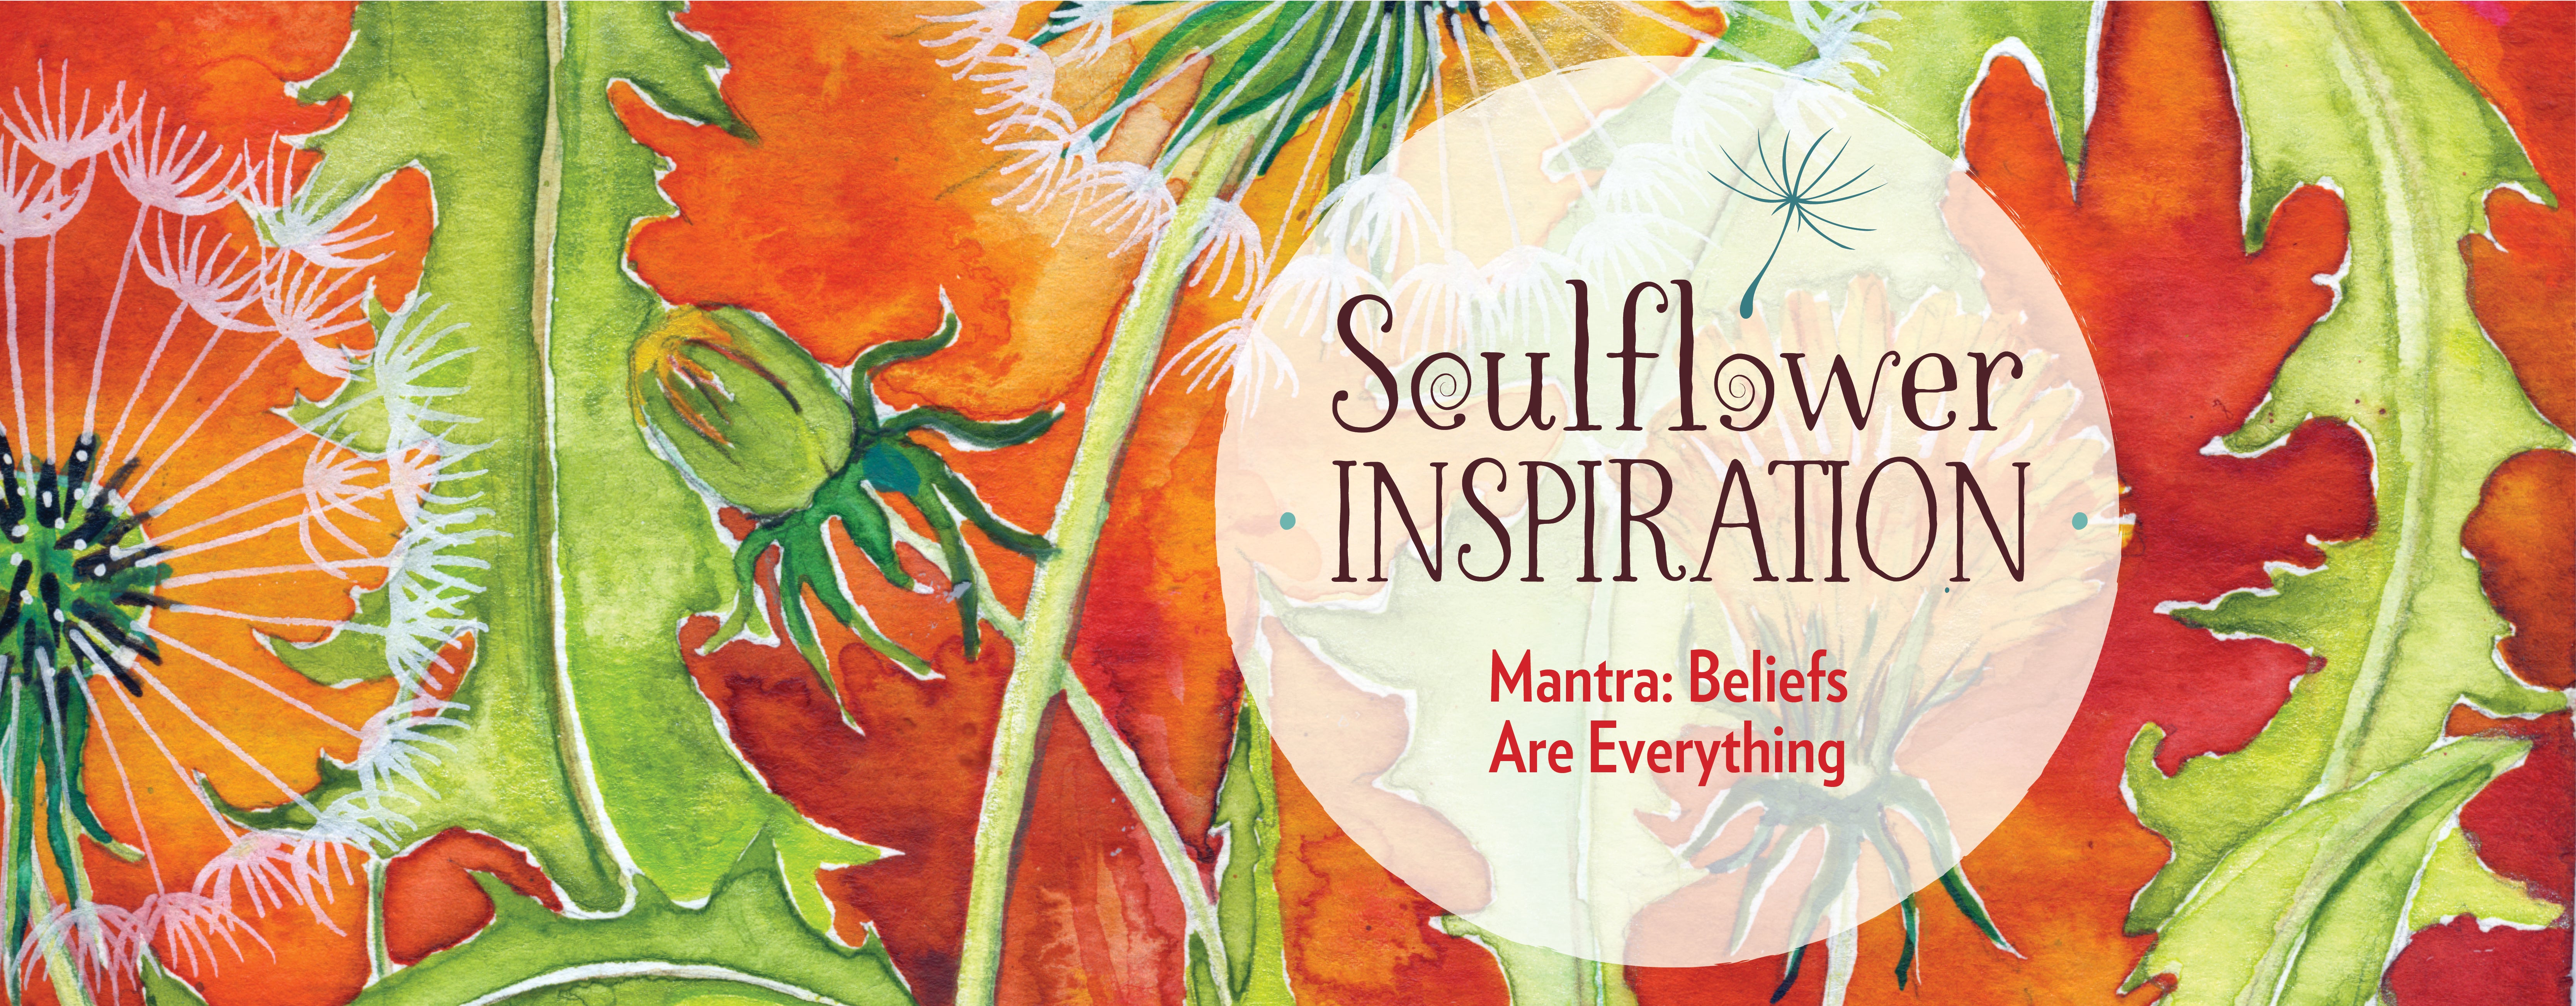 Mantra: Beliefs are Everything